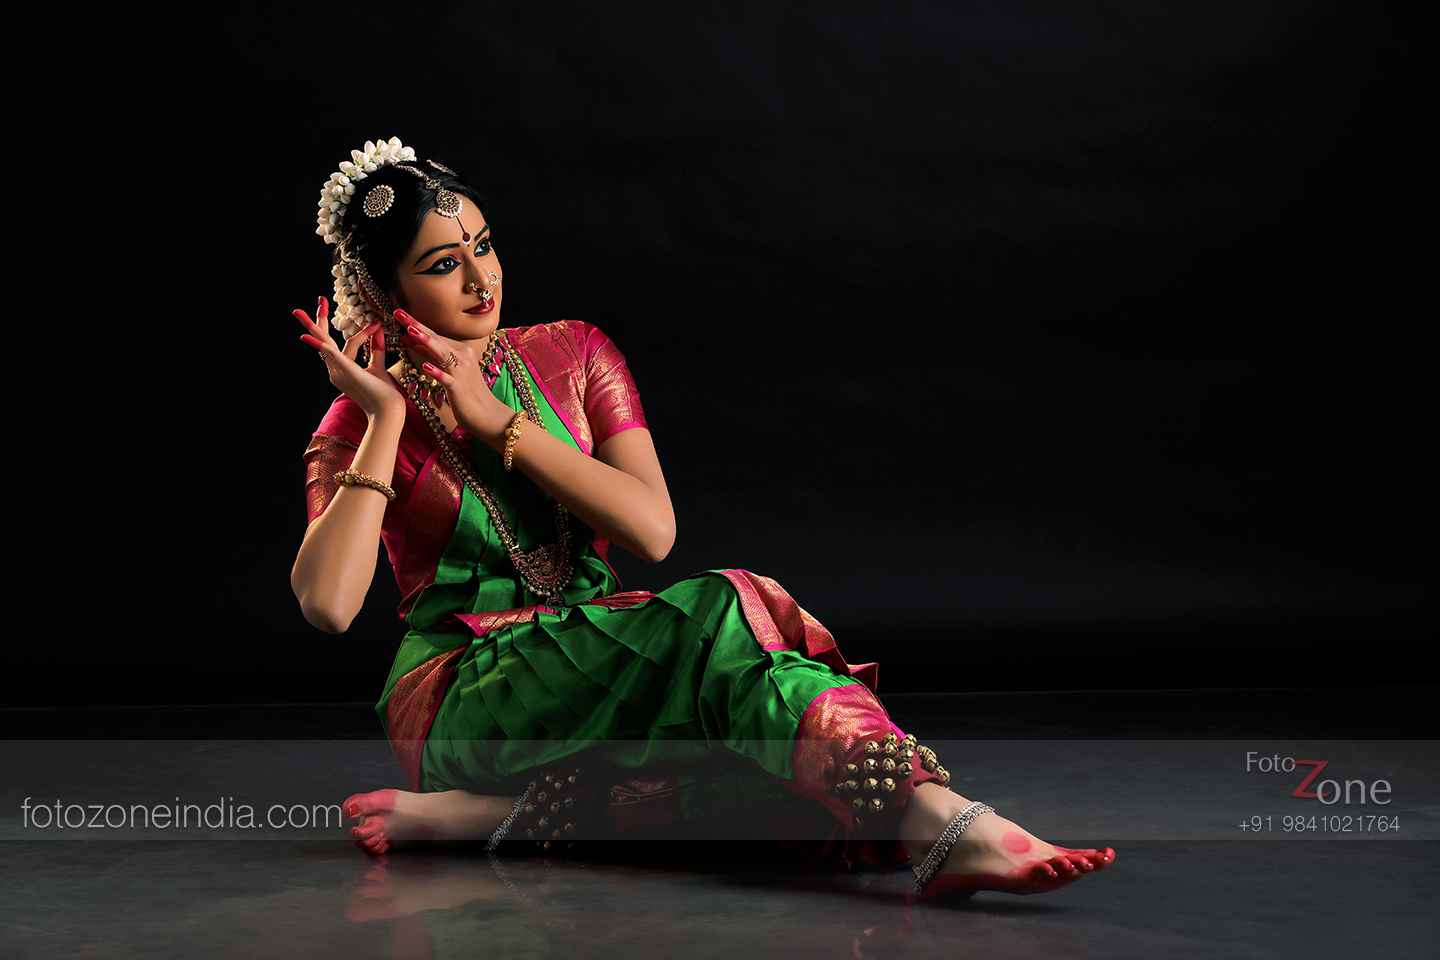 Classical Dance Images Black and White - FotoZone - Professional ...